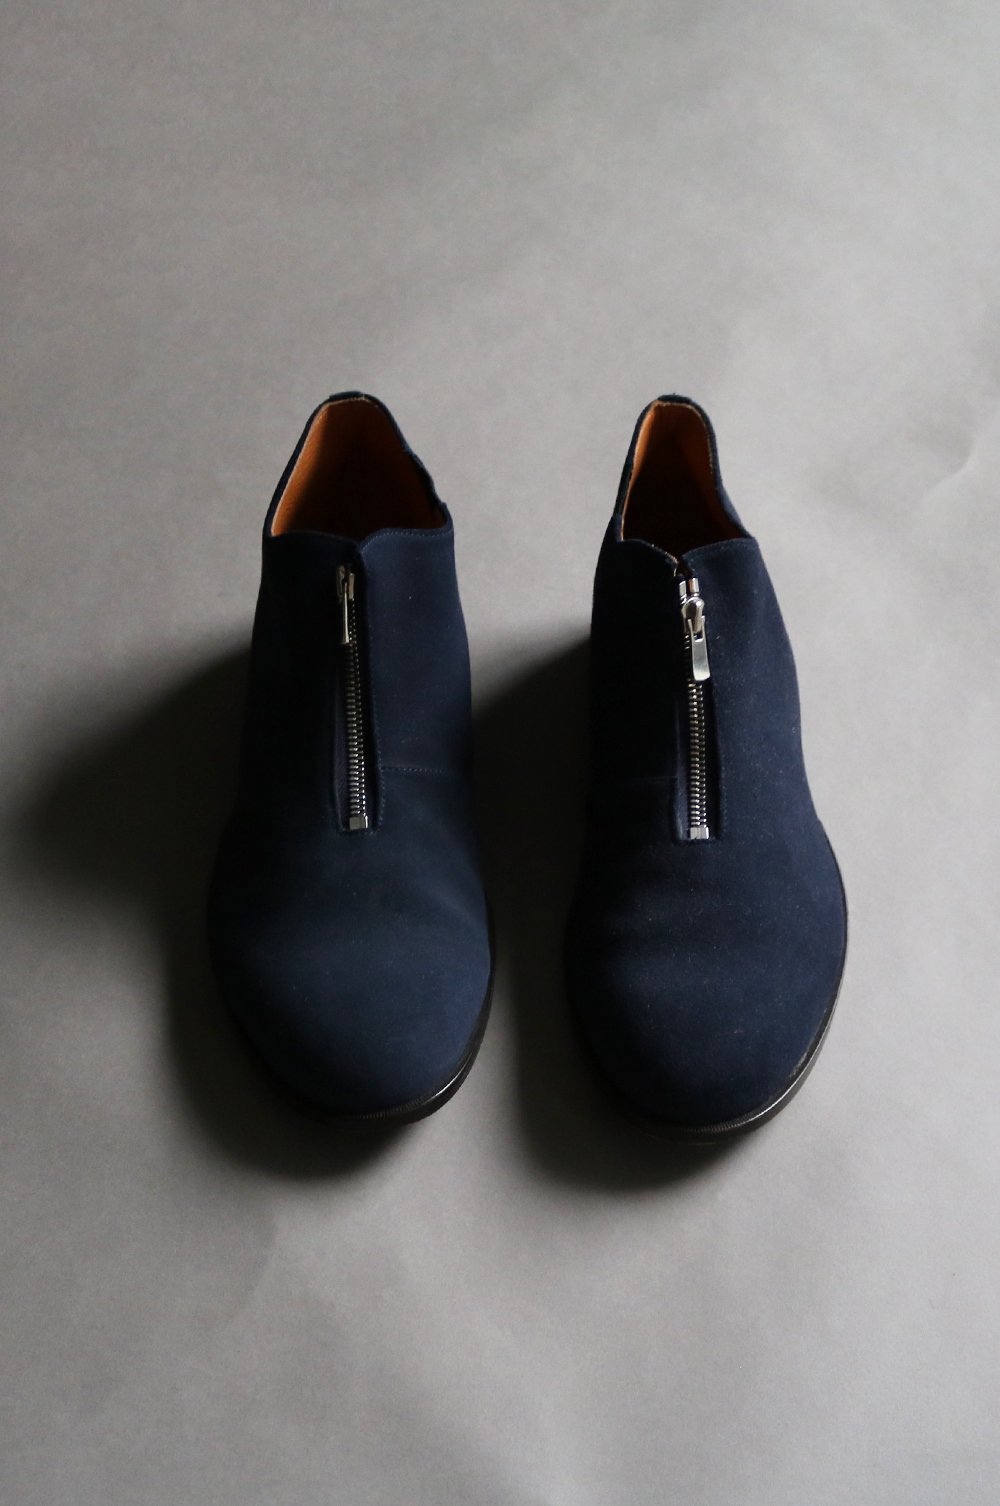 Suede Leather Zip Shoes semoh ONLINE STORE semoh(セモー)公式通販サイト